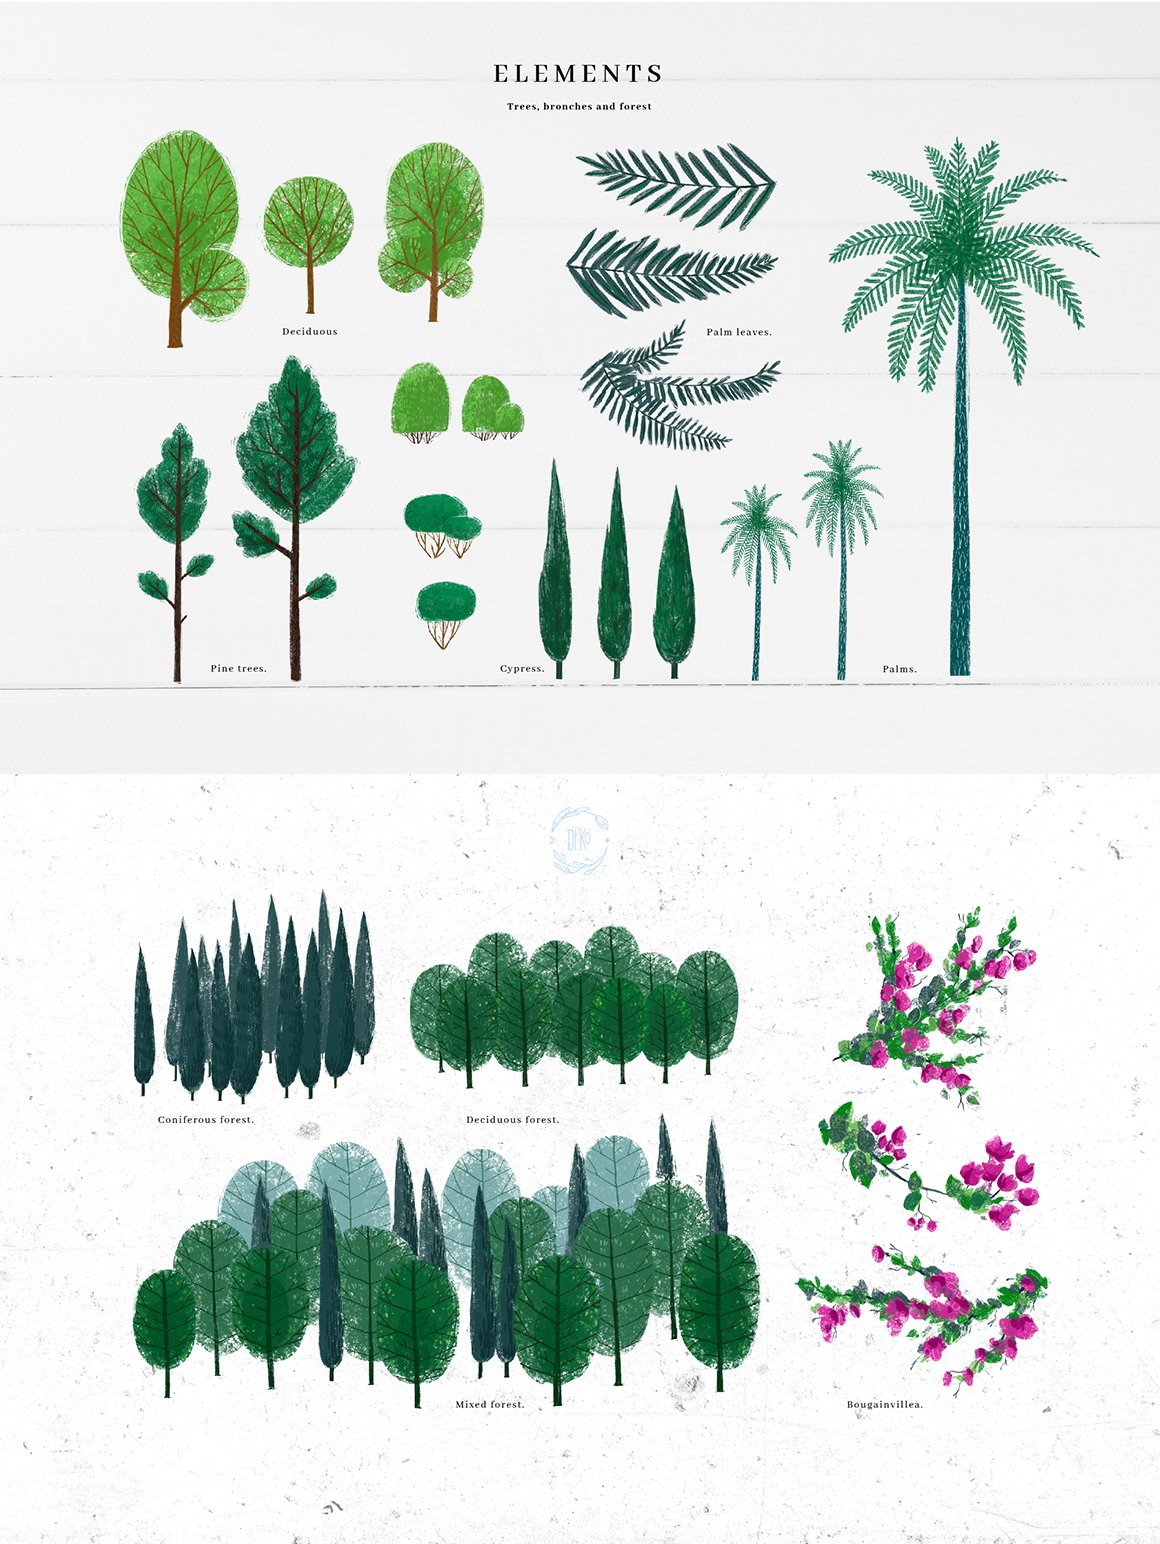 Themed green elements designs.